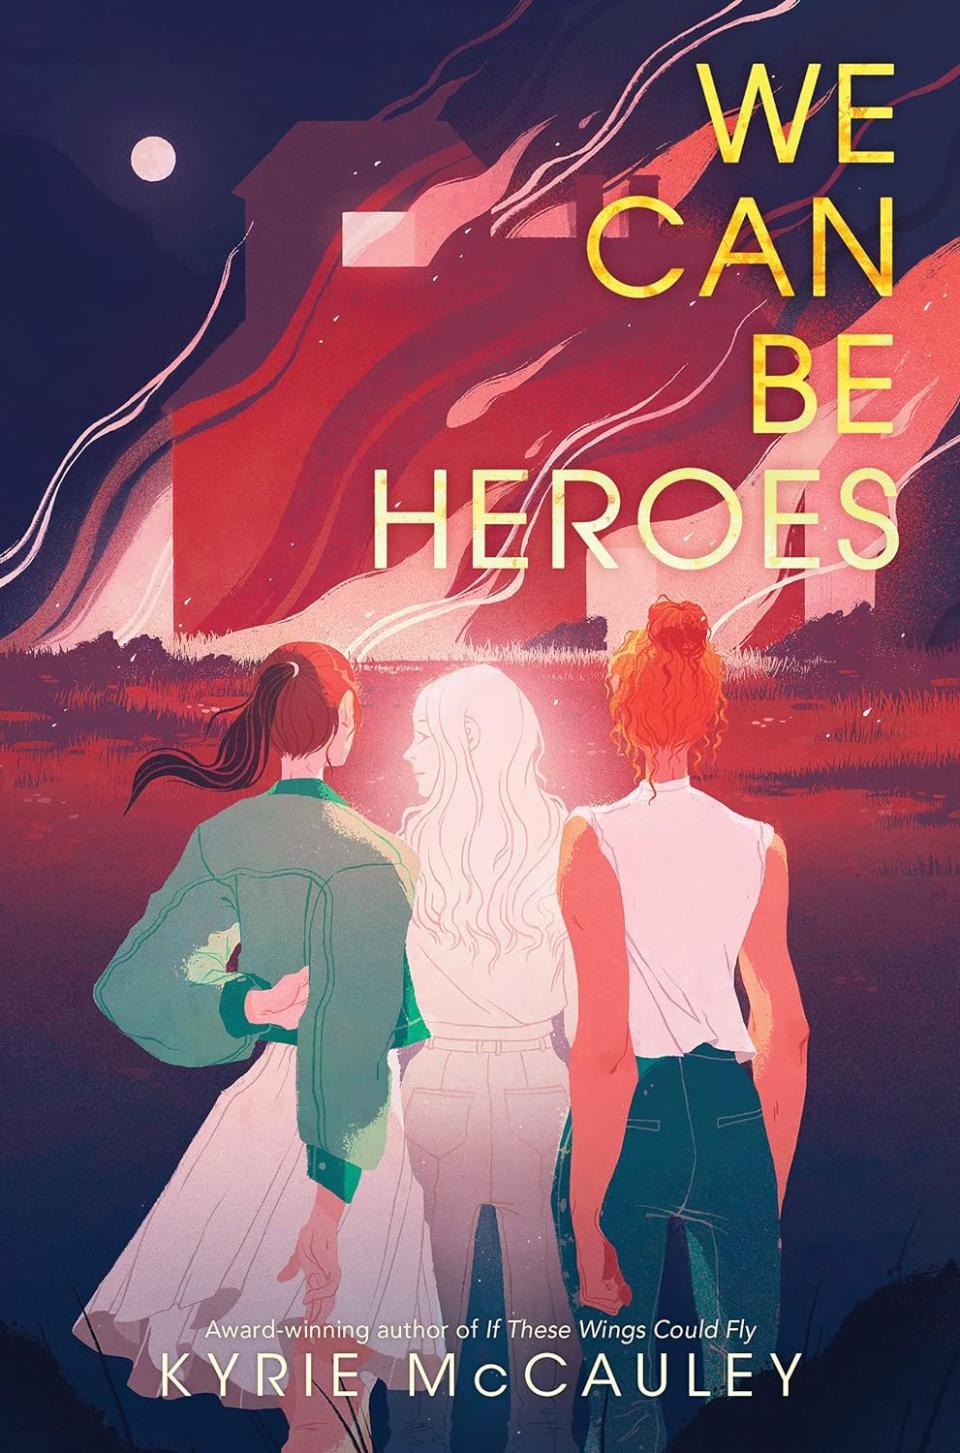 "We Can Be Heroes"